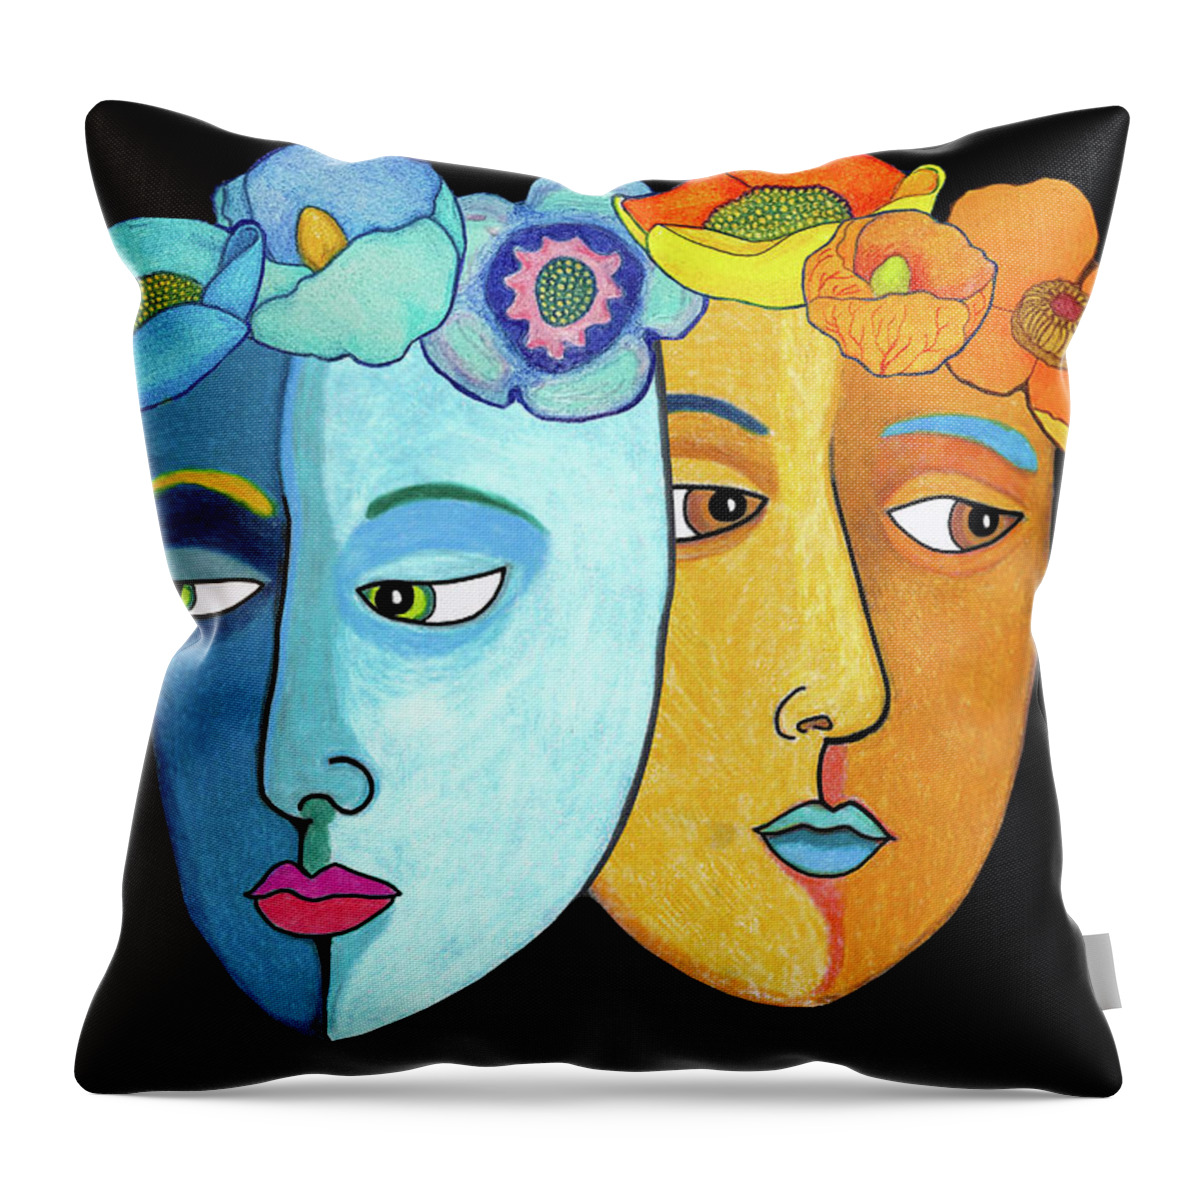 Masks Throw Pillow featuring the drawing Two Masks on Black by Lorena Cassady